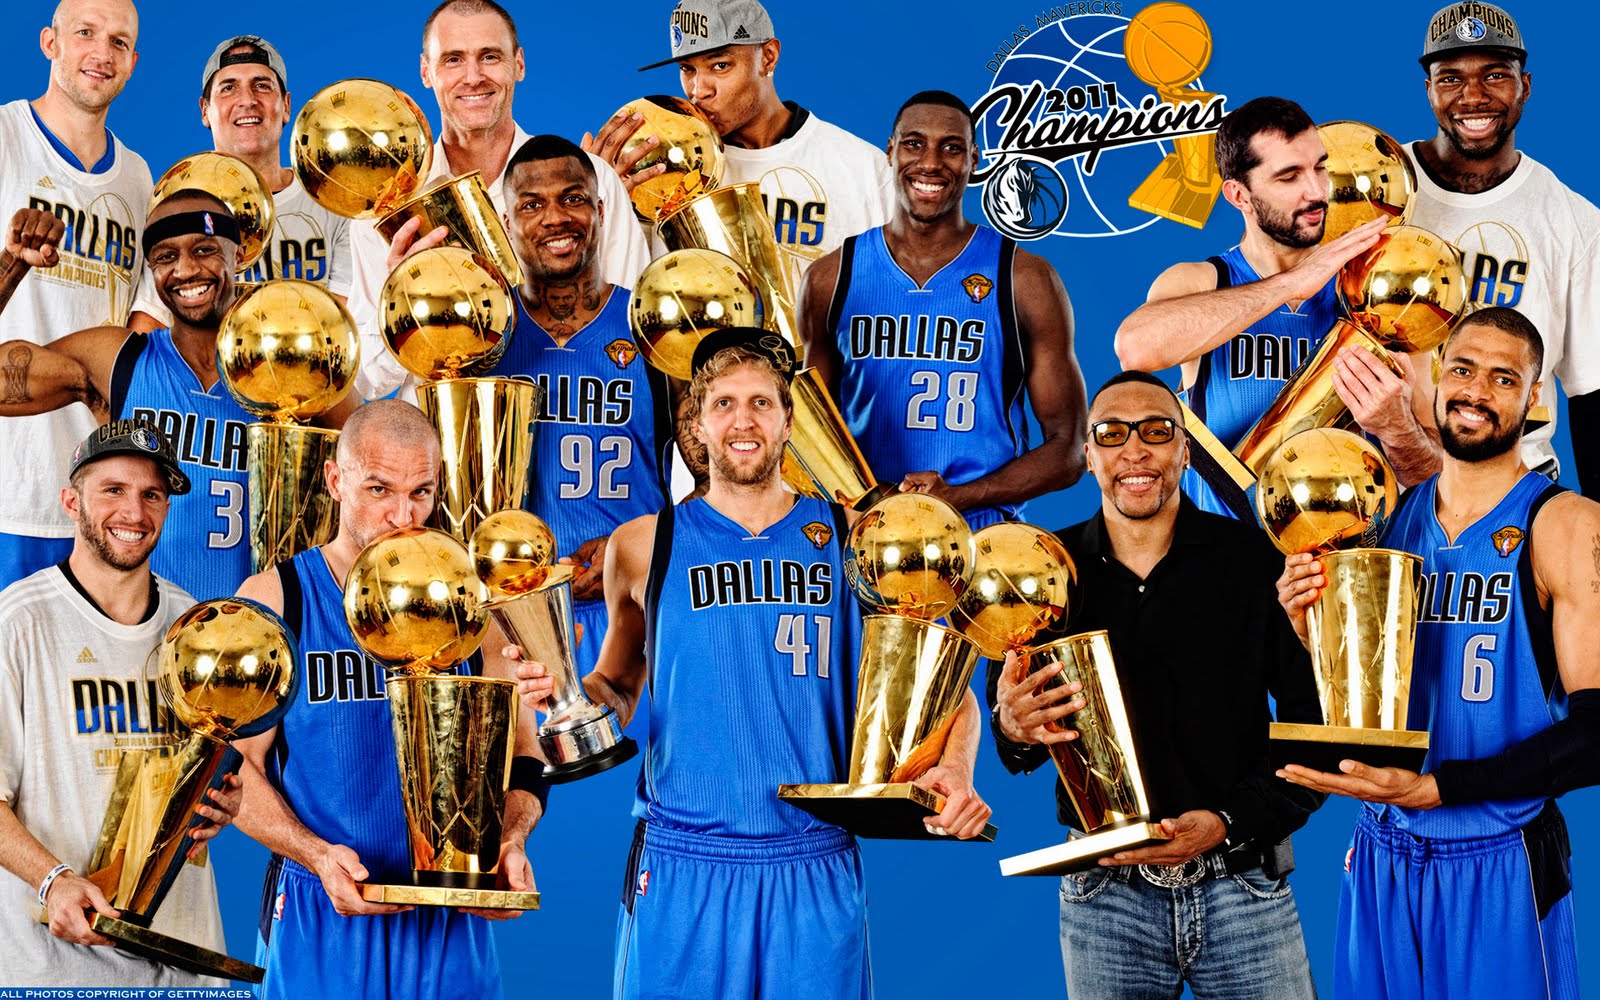 Dallas Mavericks Players With Trophies New Widescreen Wallpaper